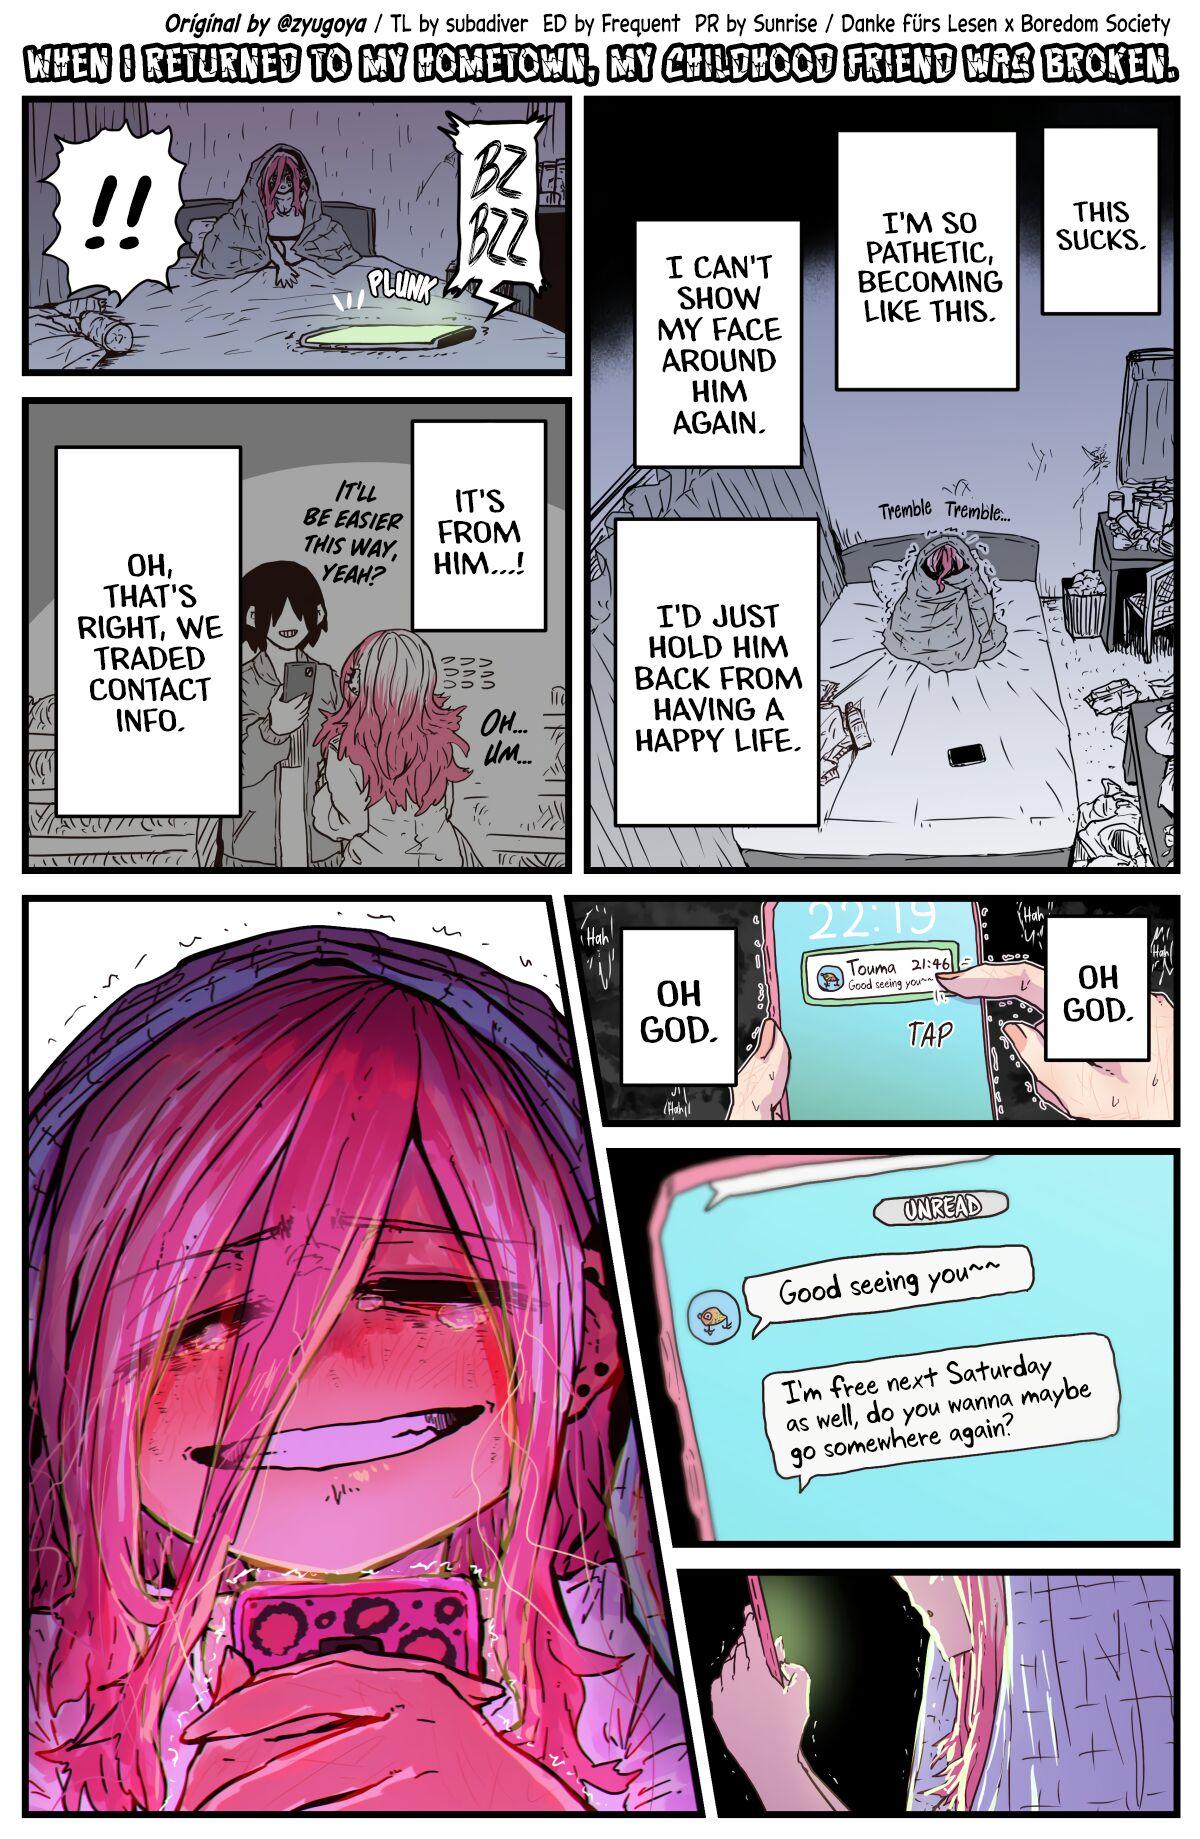 Taboo When I Returned to My Hometown, My Childhood Friend was Broken - Original Tites - Page 10